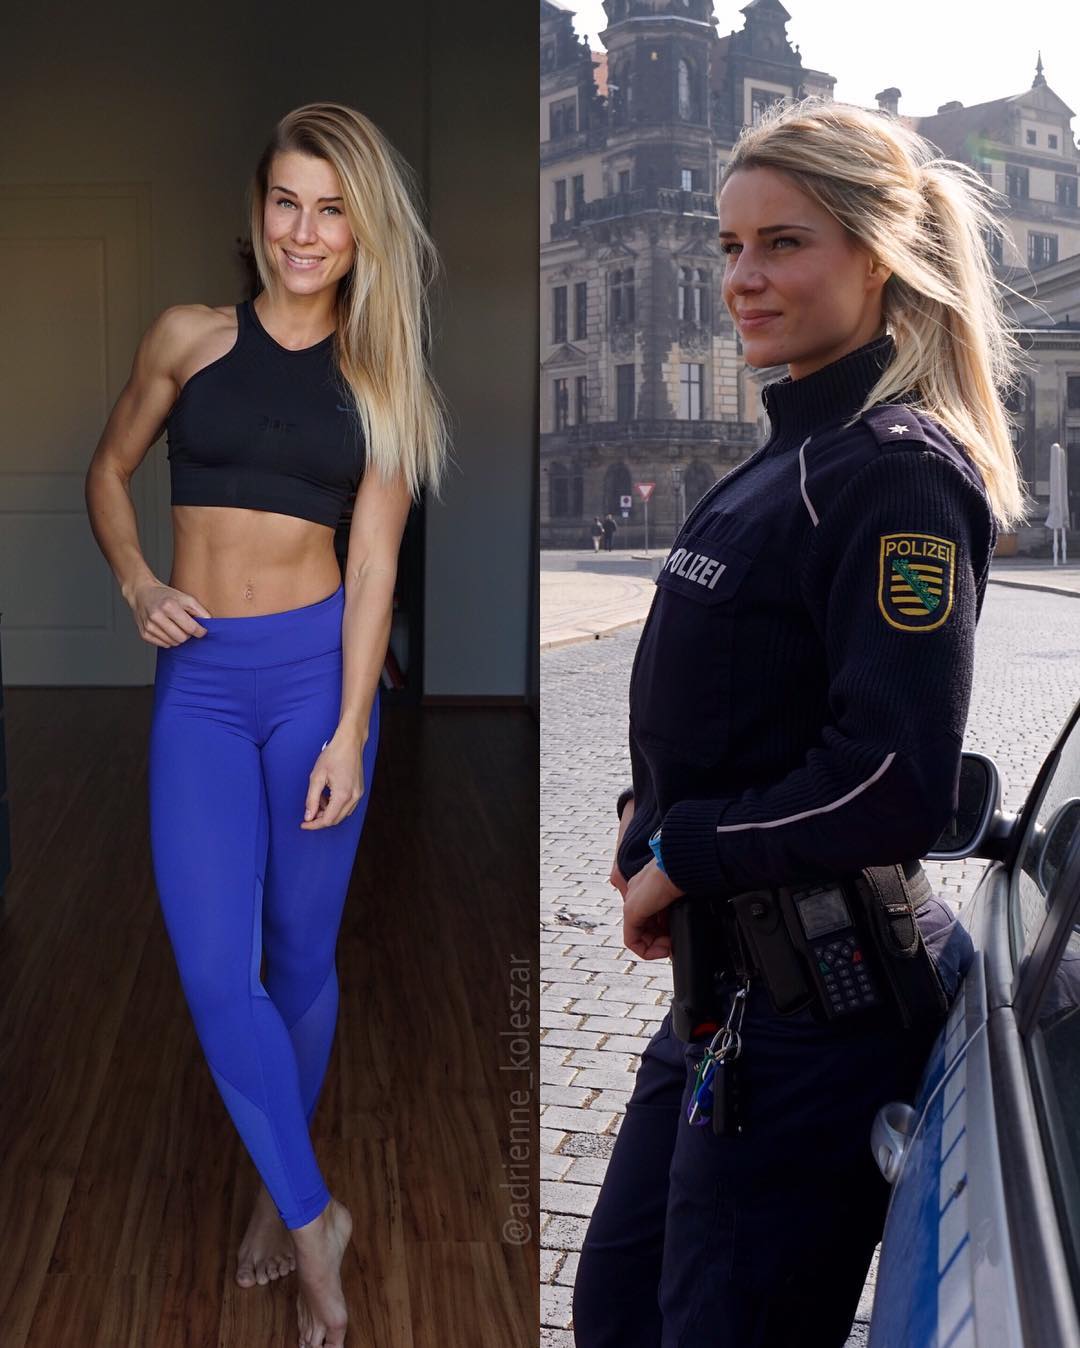 16 Photos Of World S Hottest Police Officer From Germany